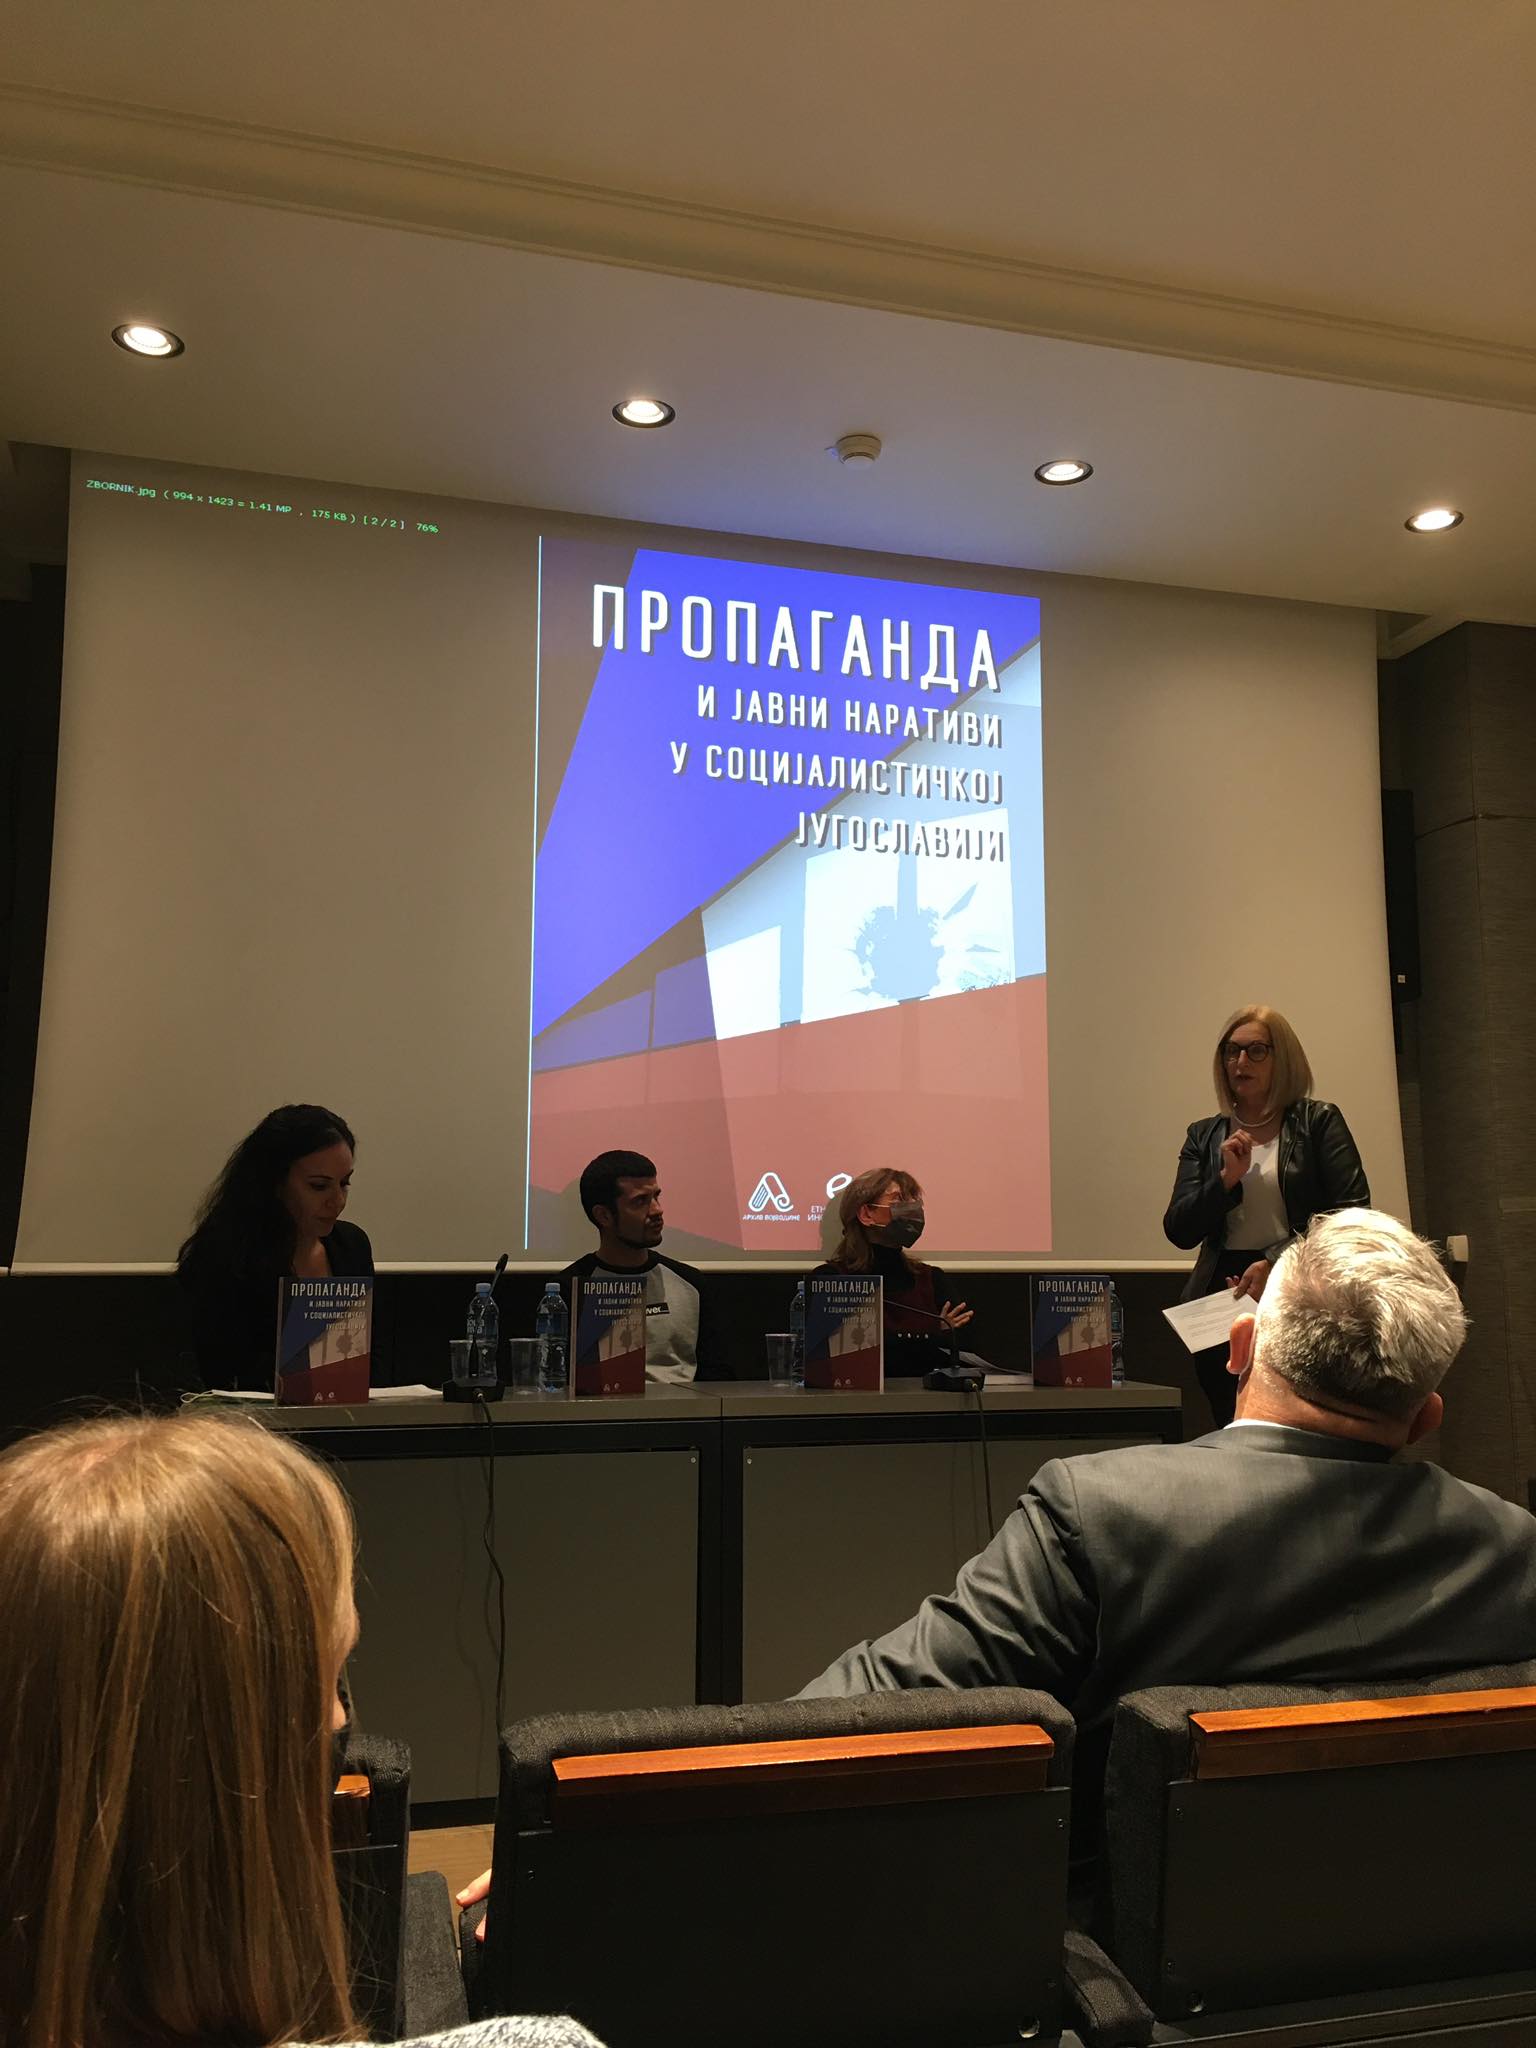 The promotion of the collection of works “Propaganda and Public Narratives in Socialist Yugoslavia” has been held